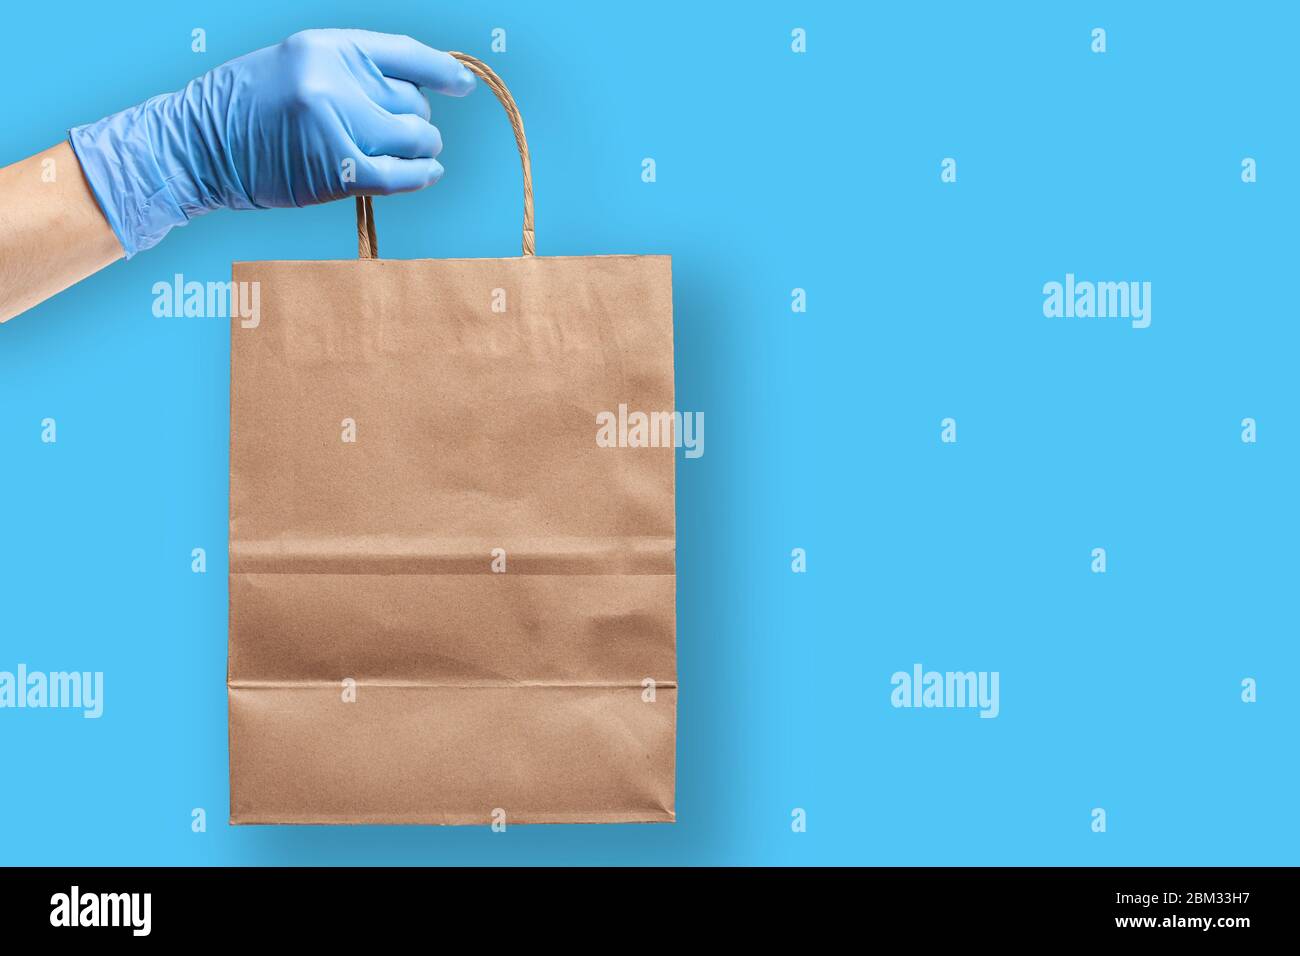 Hand wearing rubber protective glove   holds paper grocery bag. Grocery shopping and delivery concept during novel virus pandemic. Stock Photo